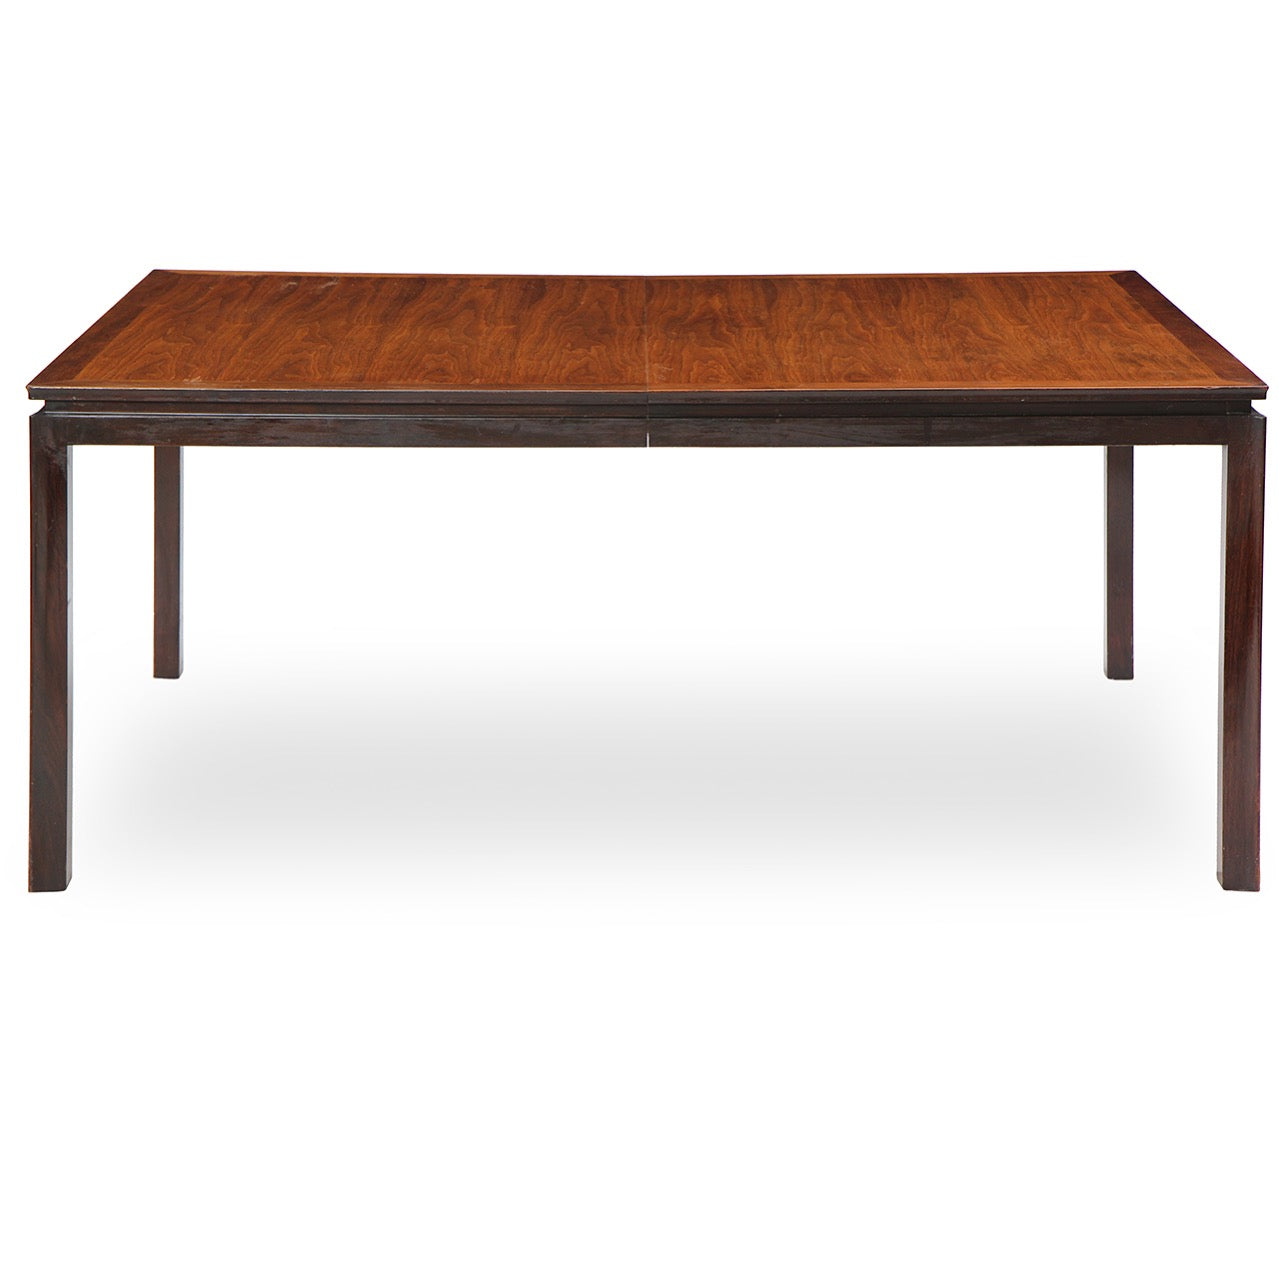 Janus Dining Table by Edward Wormley for Dunbar, 1950s